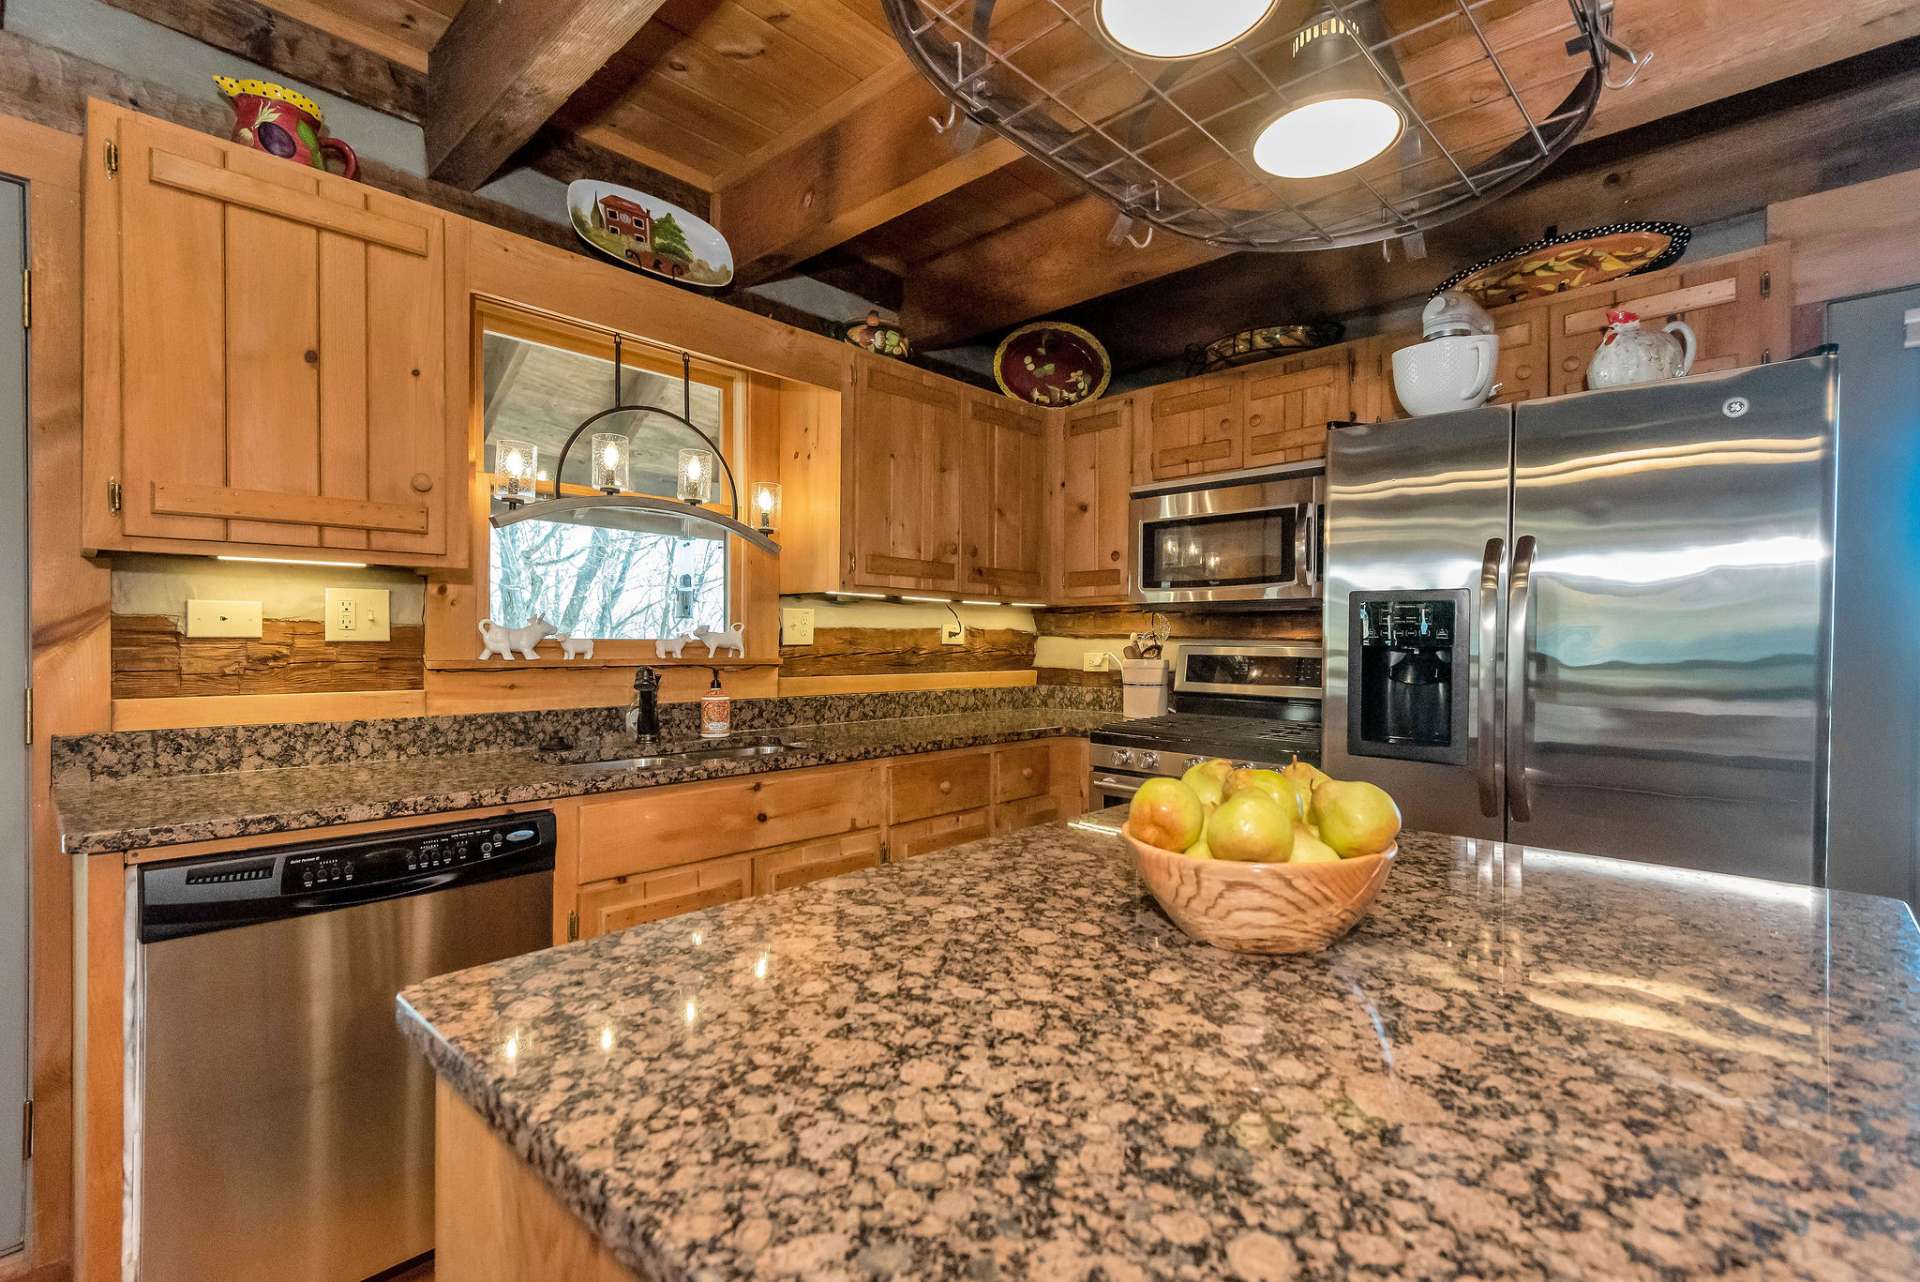 The gas range and stainless appliances give this kitchen a desired modern rustic motif.